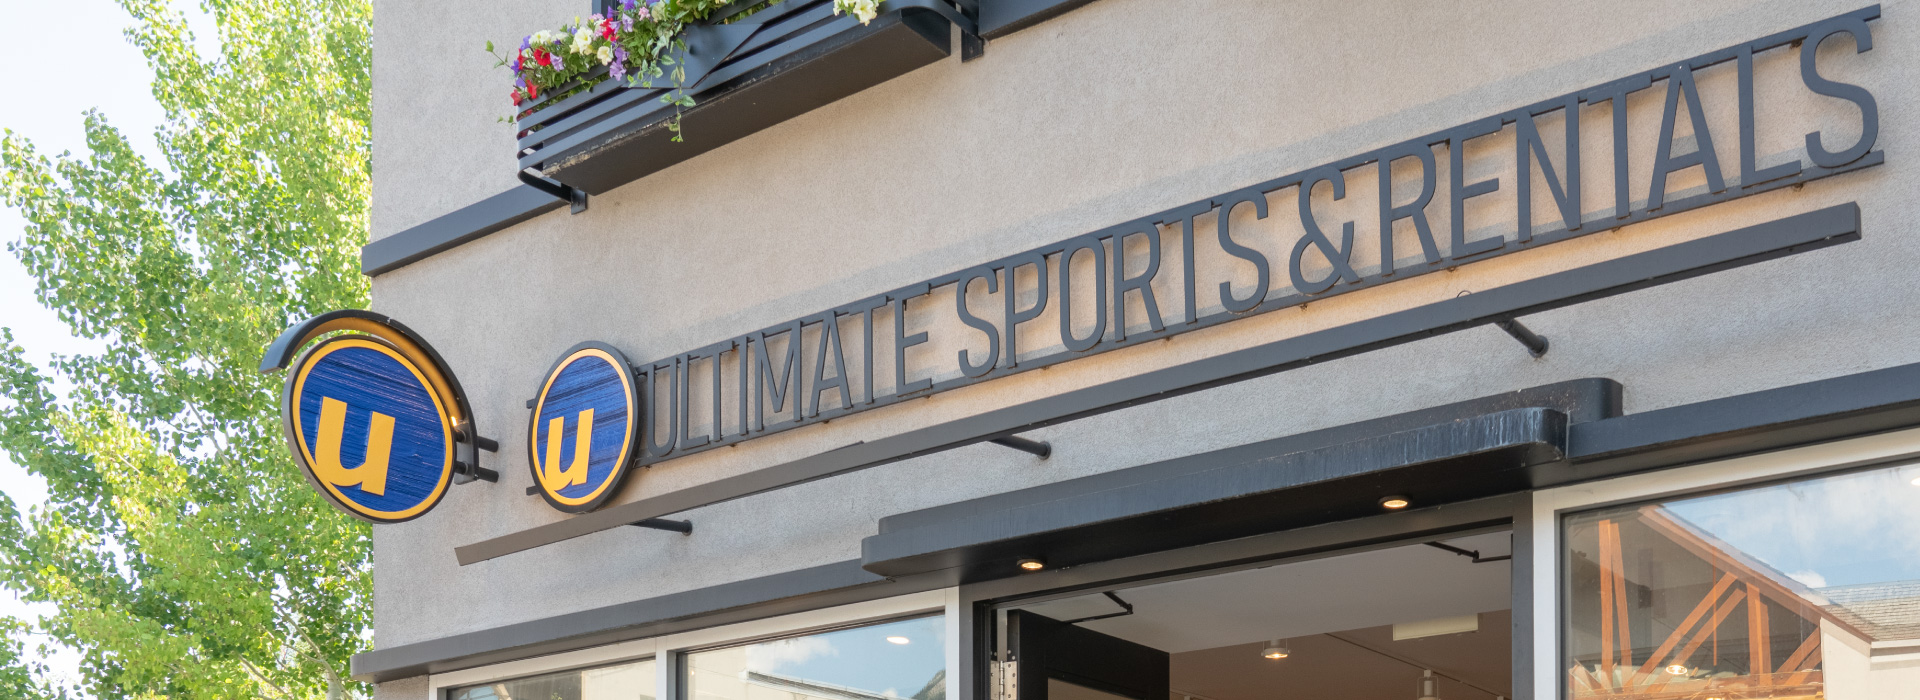 Ultimate Sports - Retail Shop